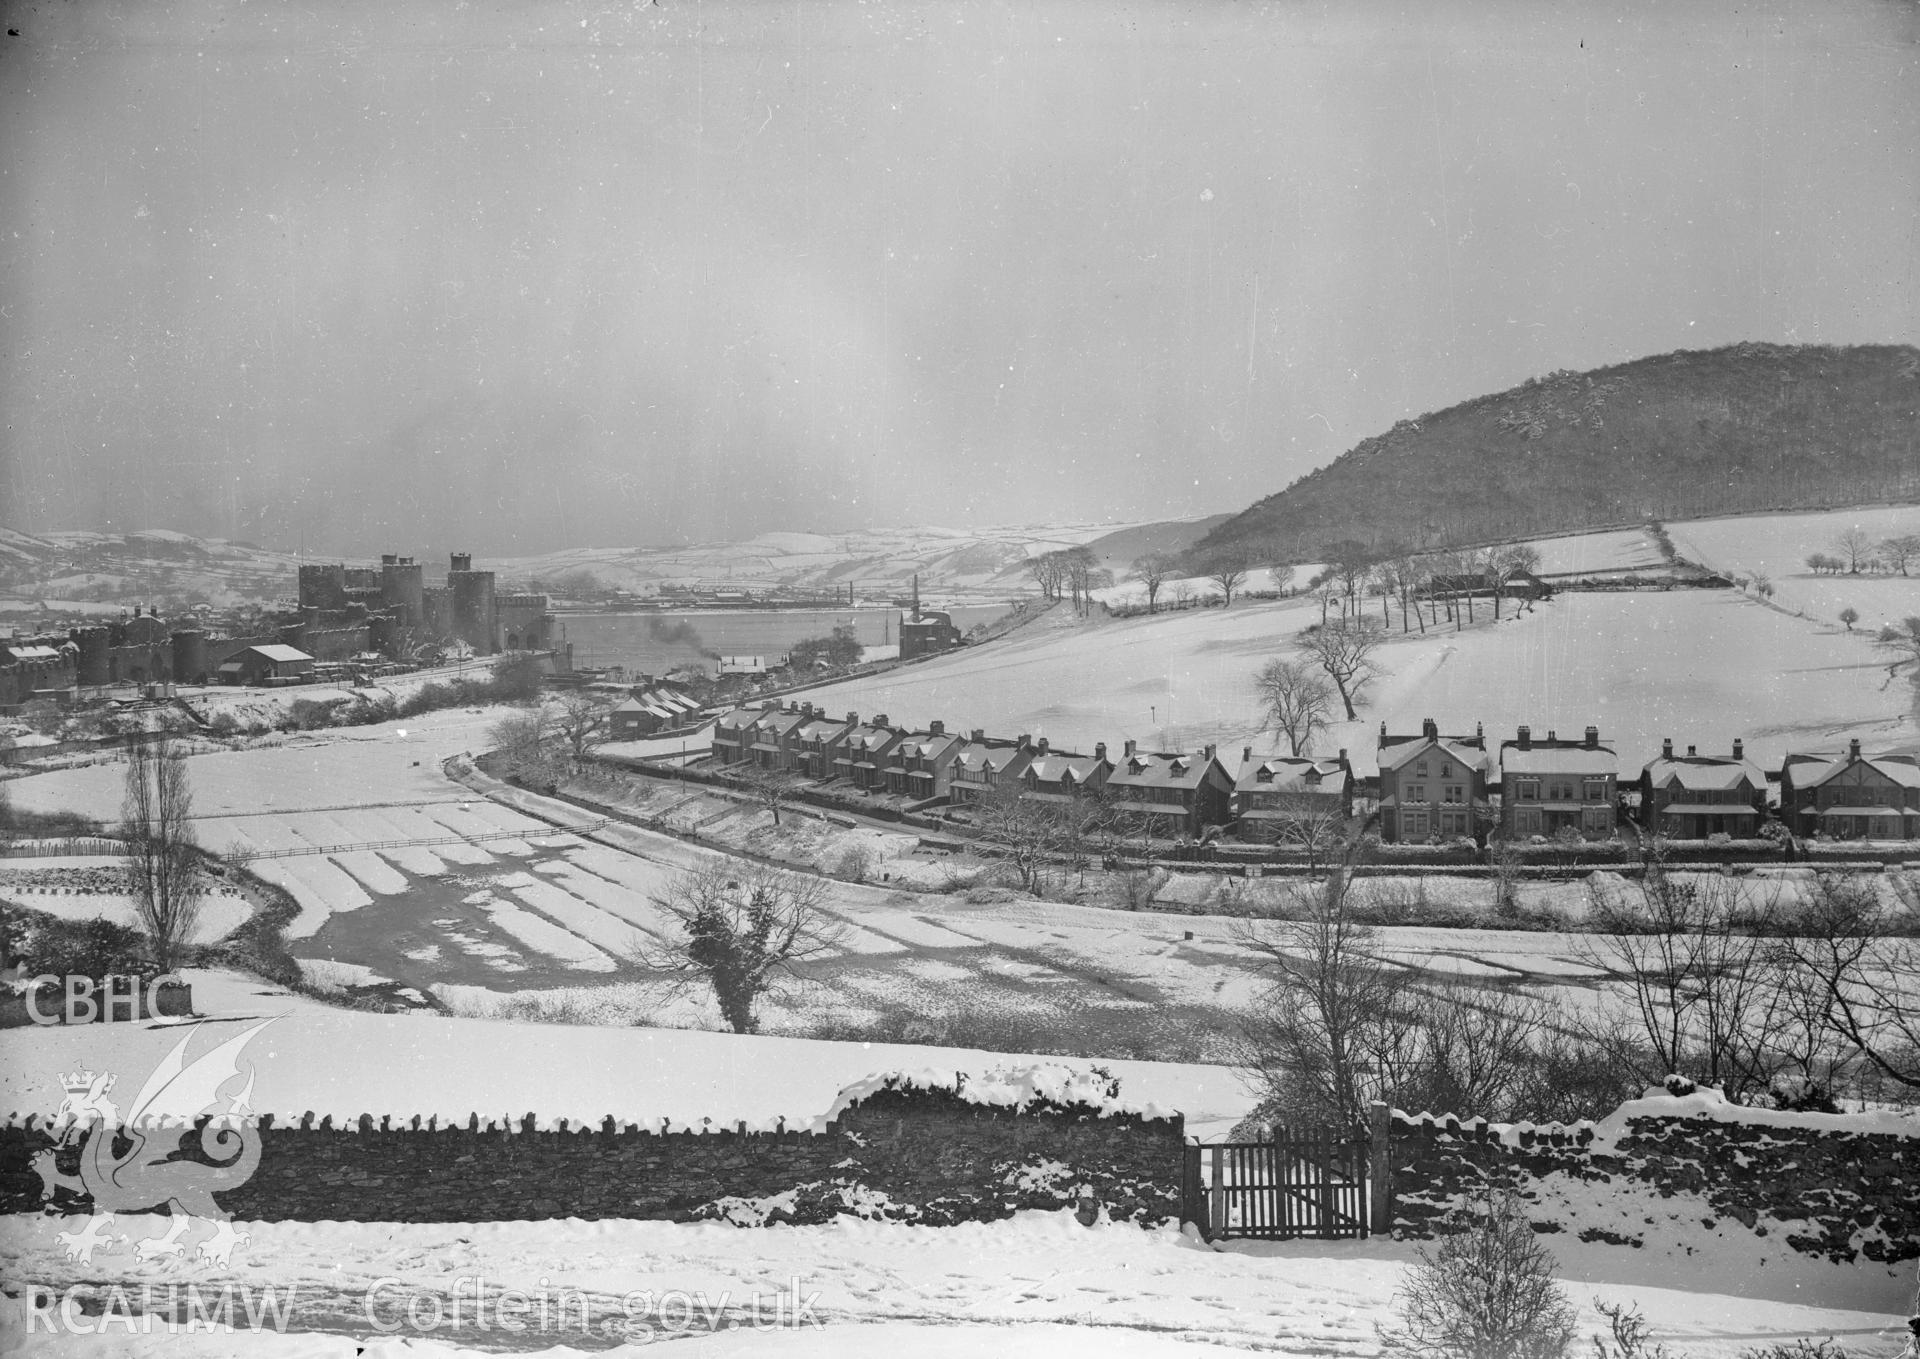 Black and white acetate negative, a copy of a glass plate showing Conwy coastline under snow.